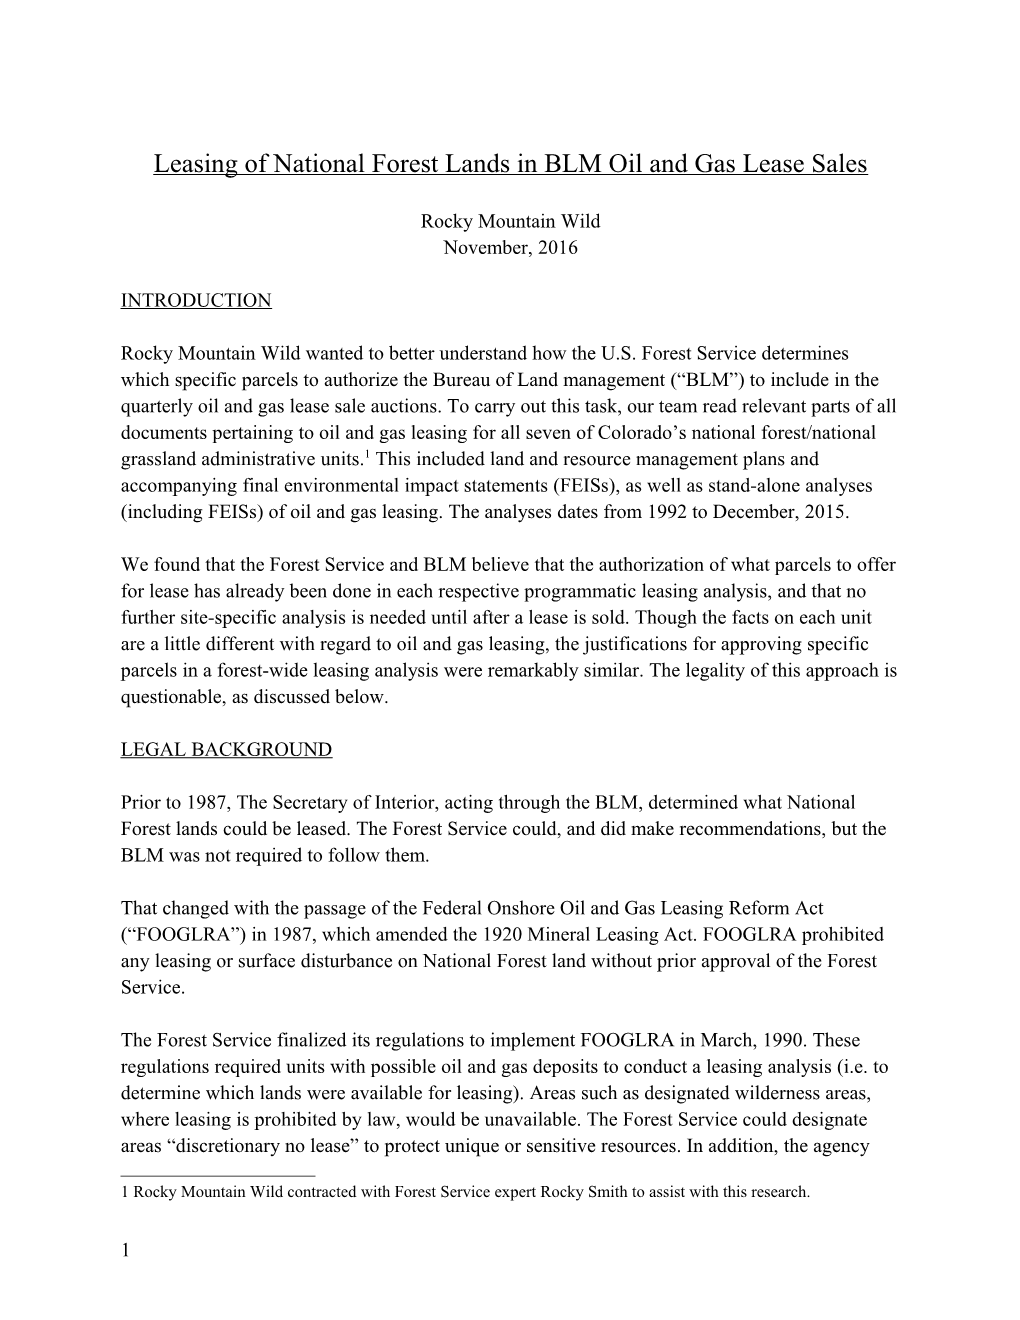 Leasing of National Forest Lands in BLM Oil and Gas Lease Sales